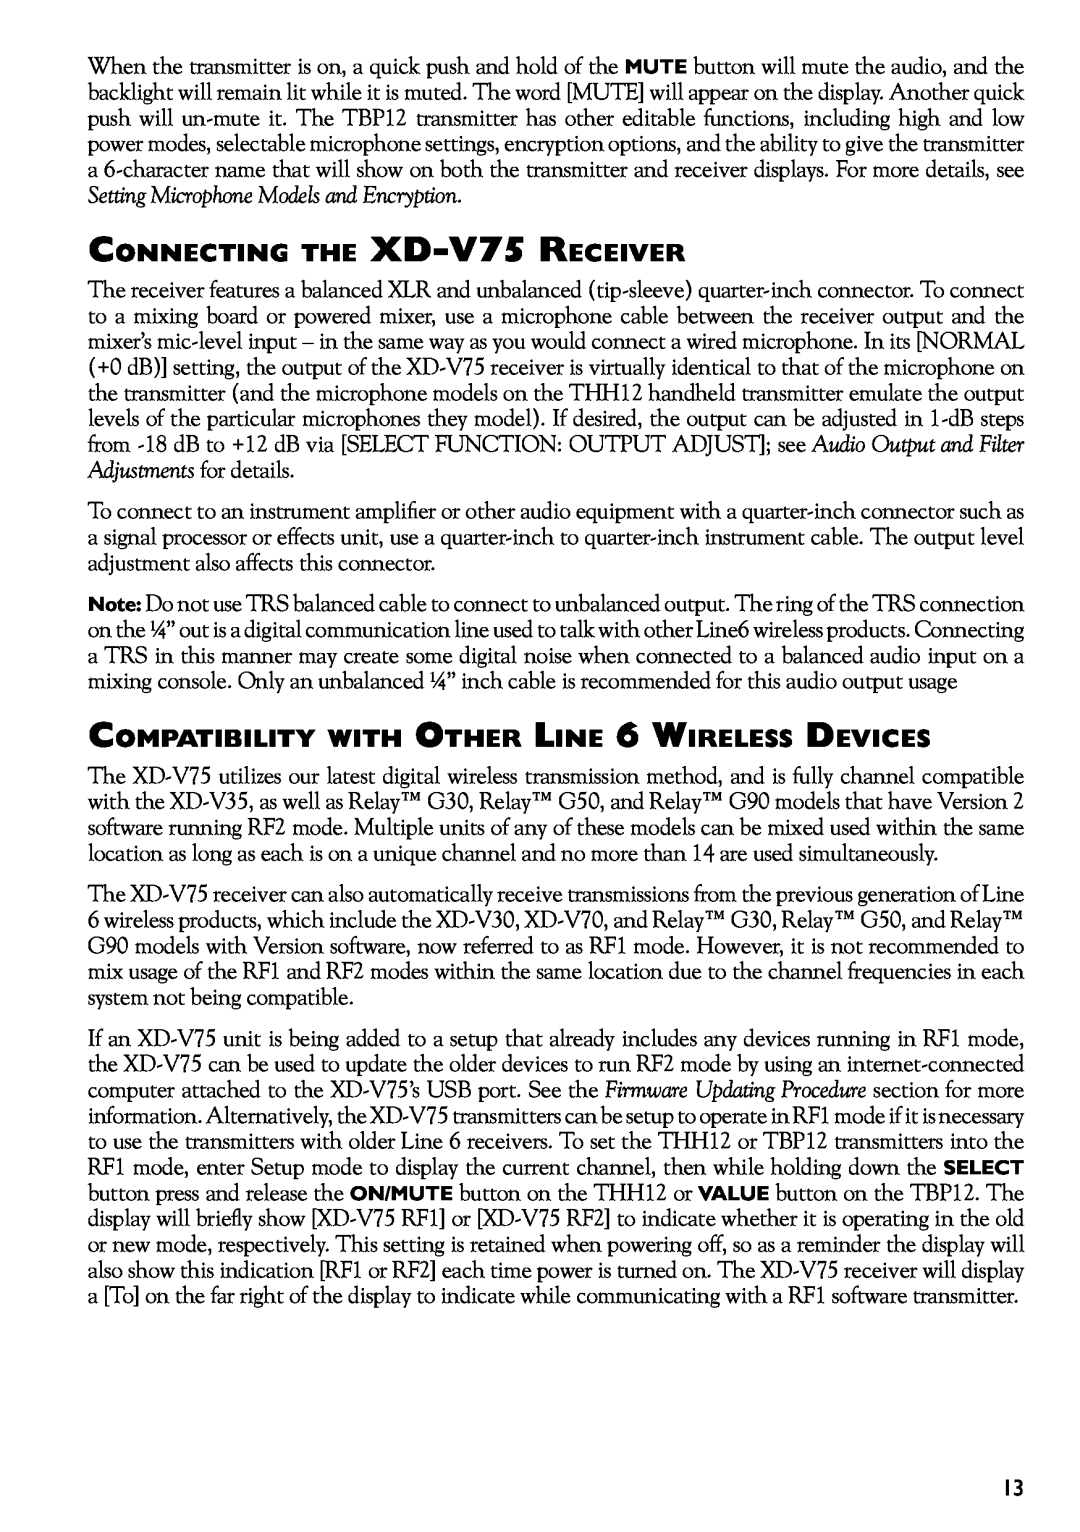 Line 6 manual Connecting the XD-V75Receiver, Compatibility with Other Line 6 Wireless Devices 